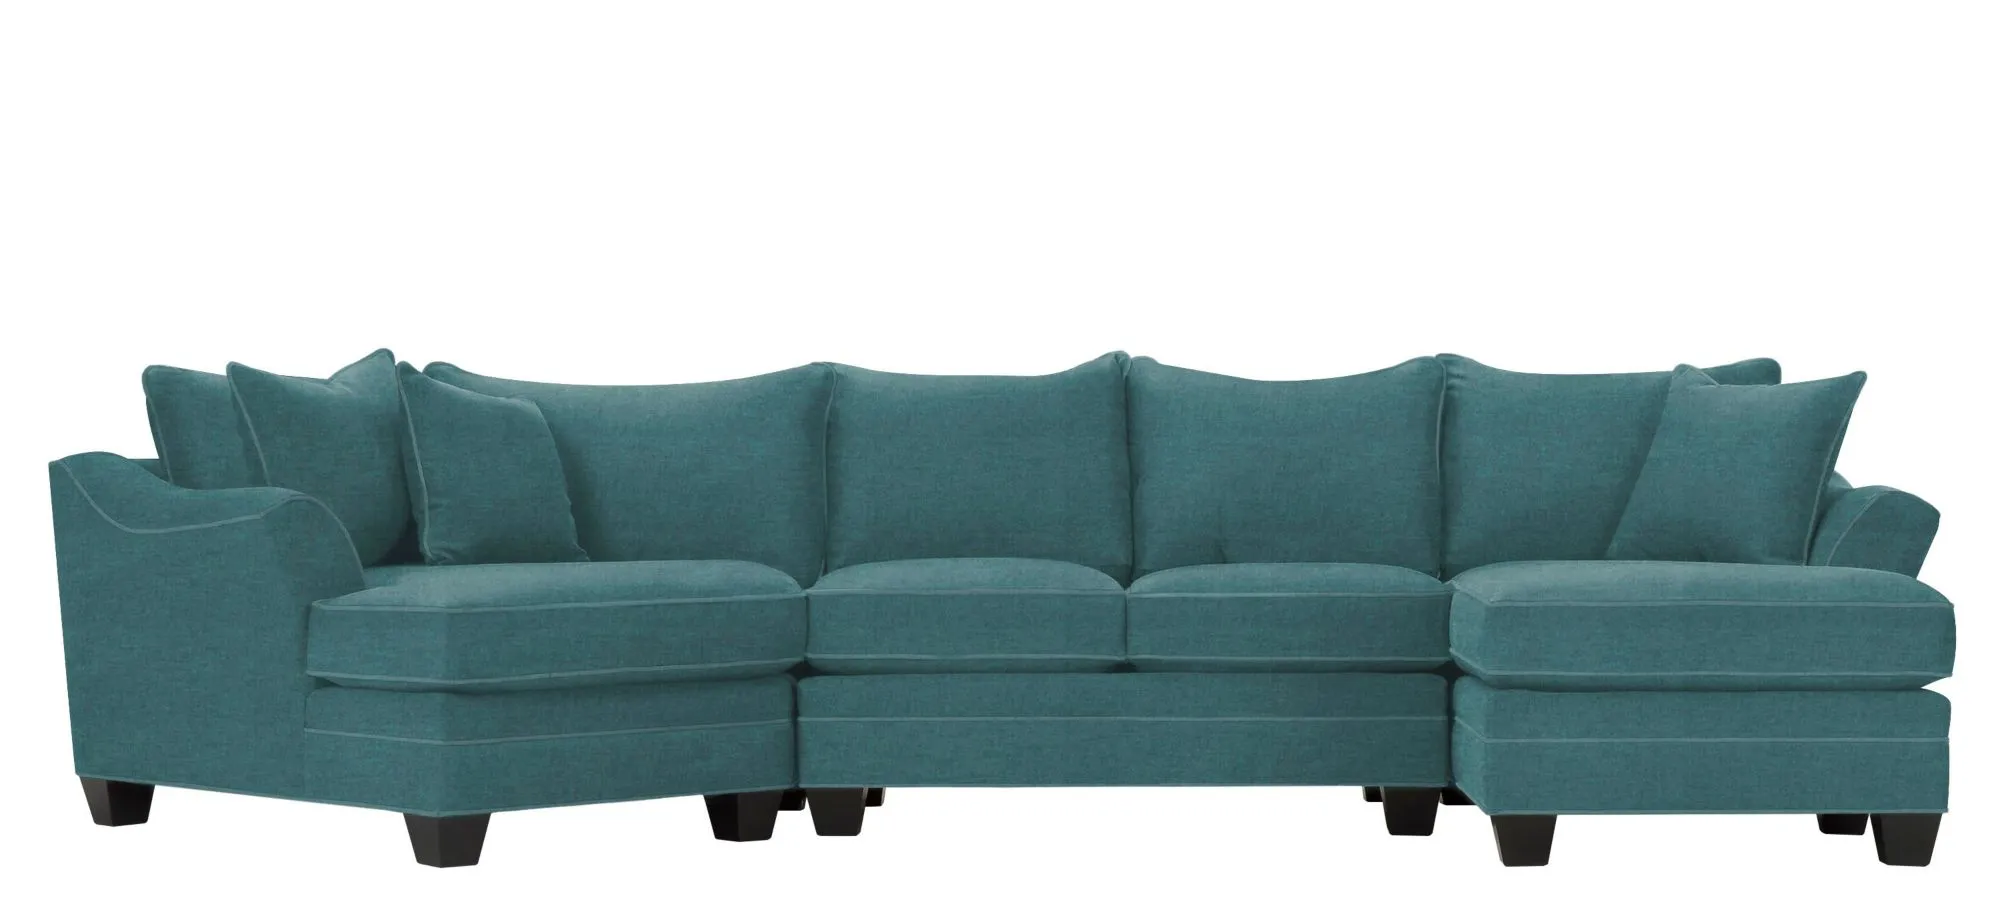 Foresthill 3-pc. Right Hand Facing Sectional Sofa in Santa Rosa Turquoise by H.M. Richards